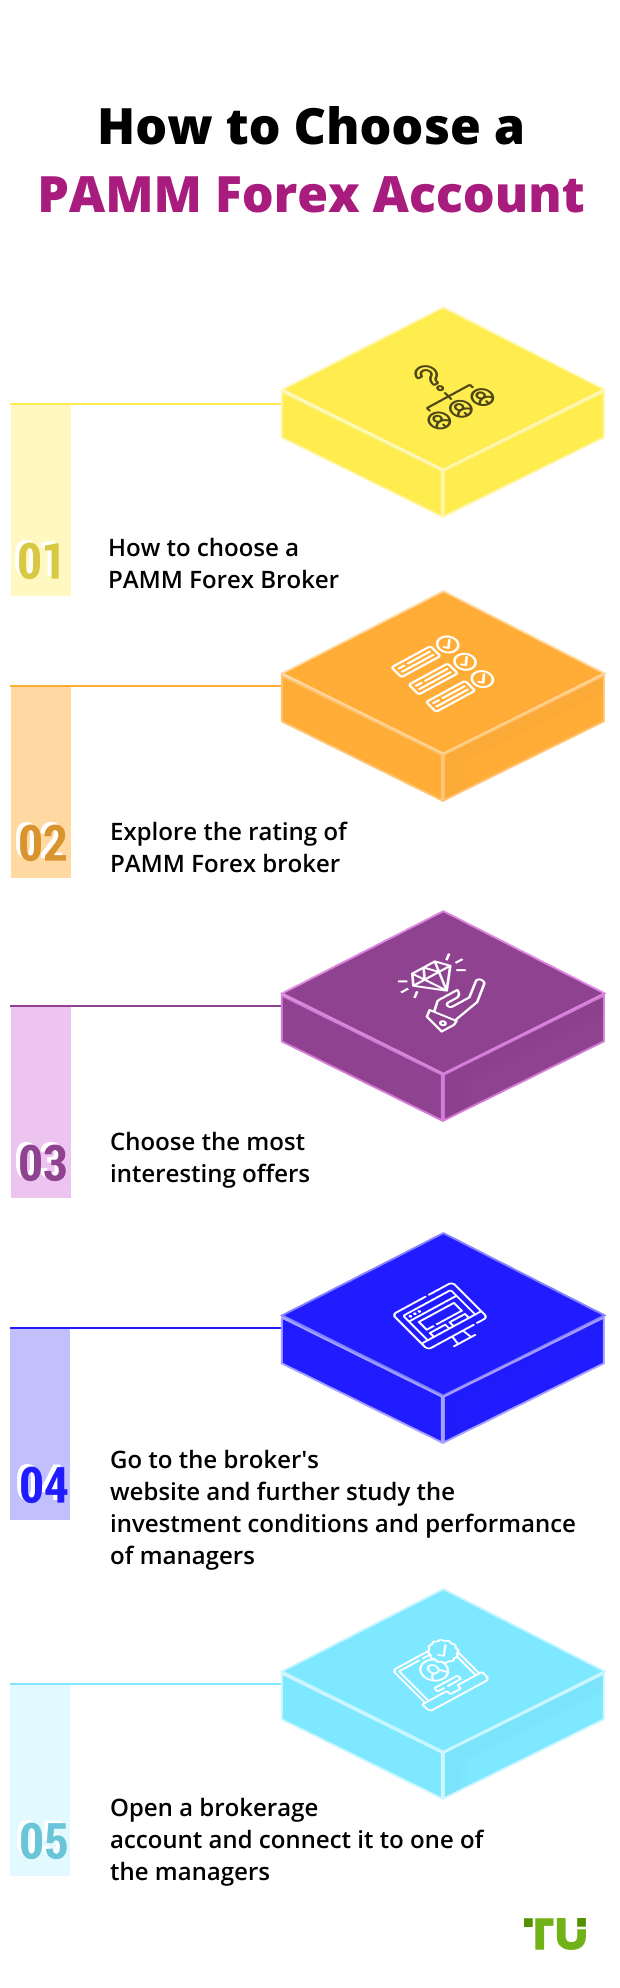 Forex brokers with pamm accounts